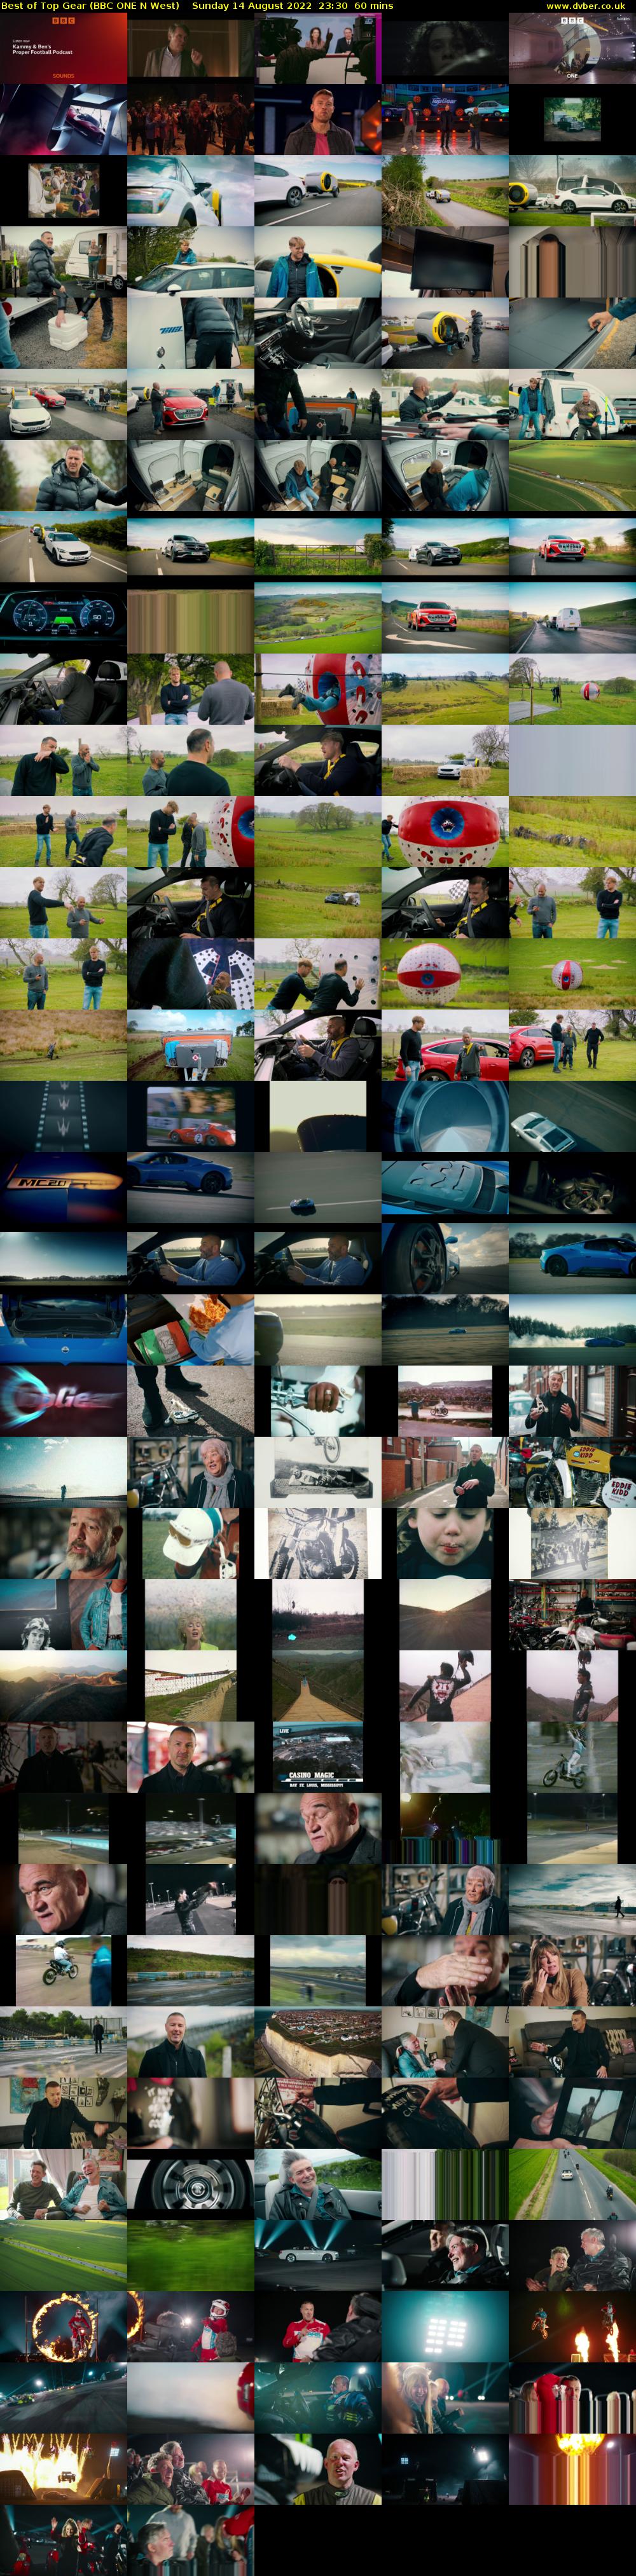 Best of Top Gear (BBC ONE N West) Sunday 14 August 2022 23:30 - 00:30